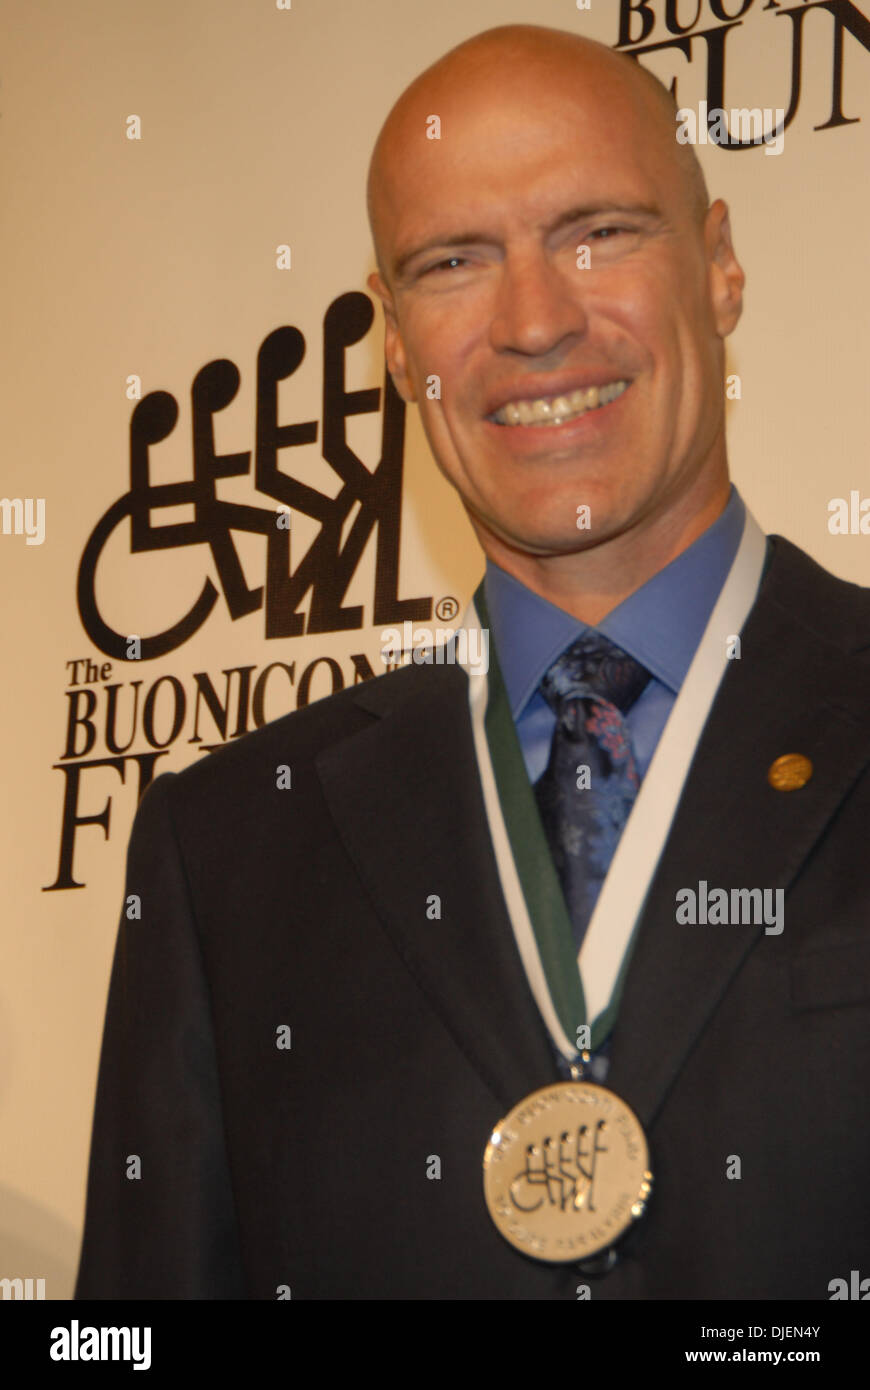 Sep 17, 2007 - New York, NY, USA - MARK MESSIER attending the 22nd Annual Great Sports Legends Dinner at the Waldorf in New York City. (Credit Image: © Jeffrey Geller/ZUMA Press) Stock Photo